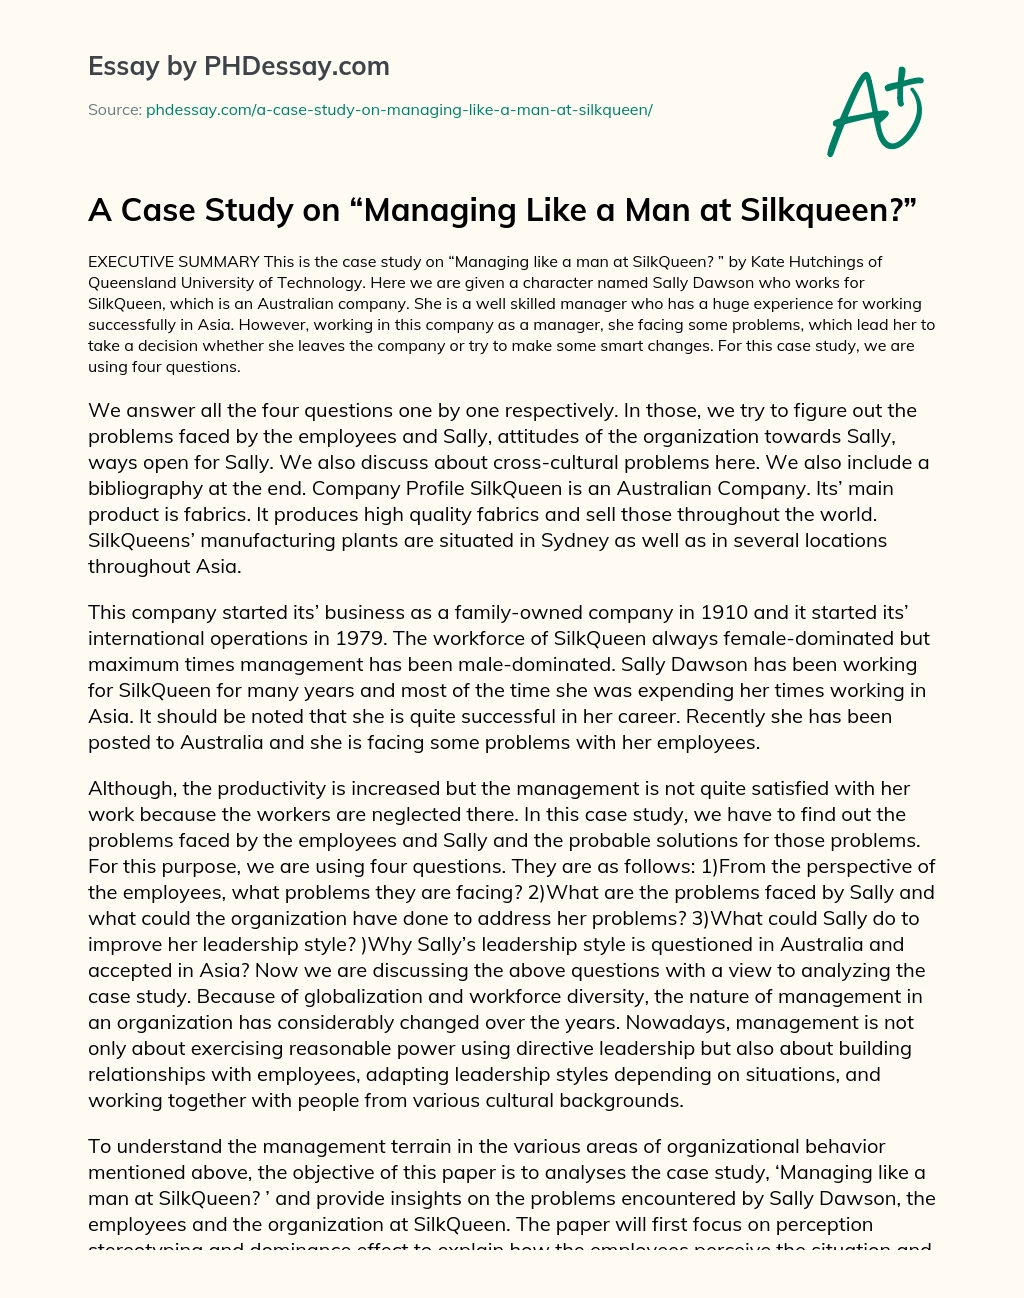 A Case Study on “Managing Like a Man at Silkqueen” essay